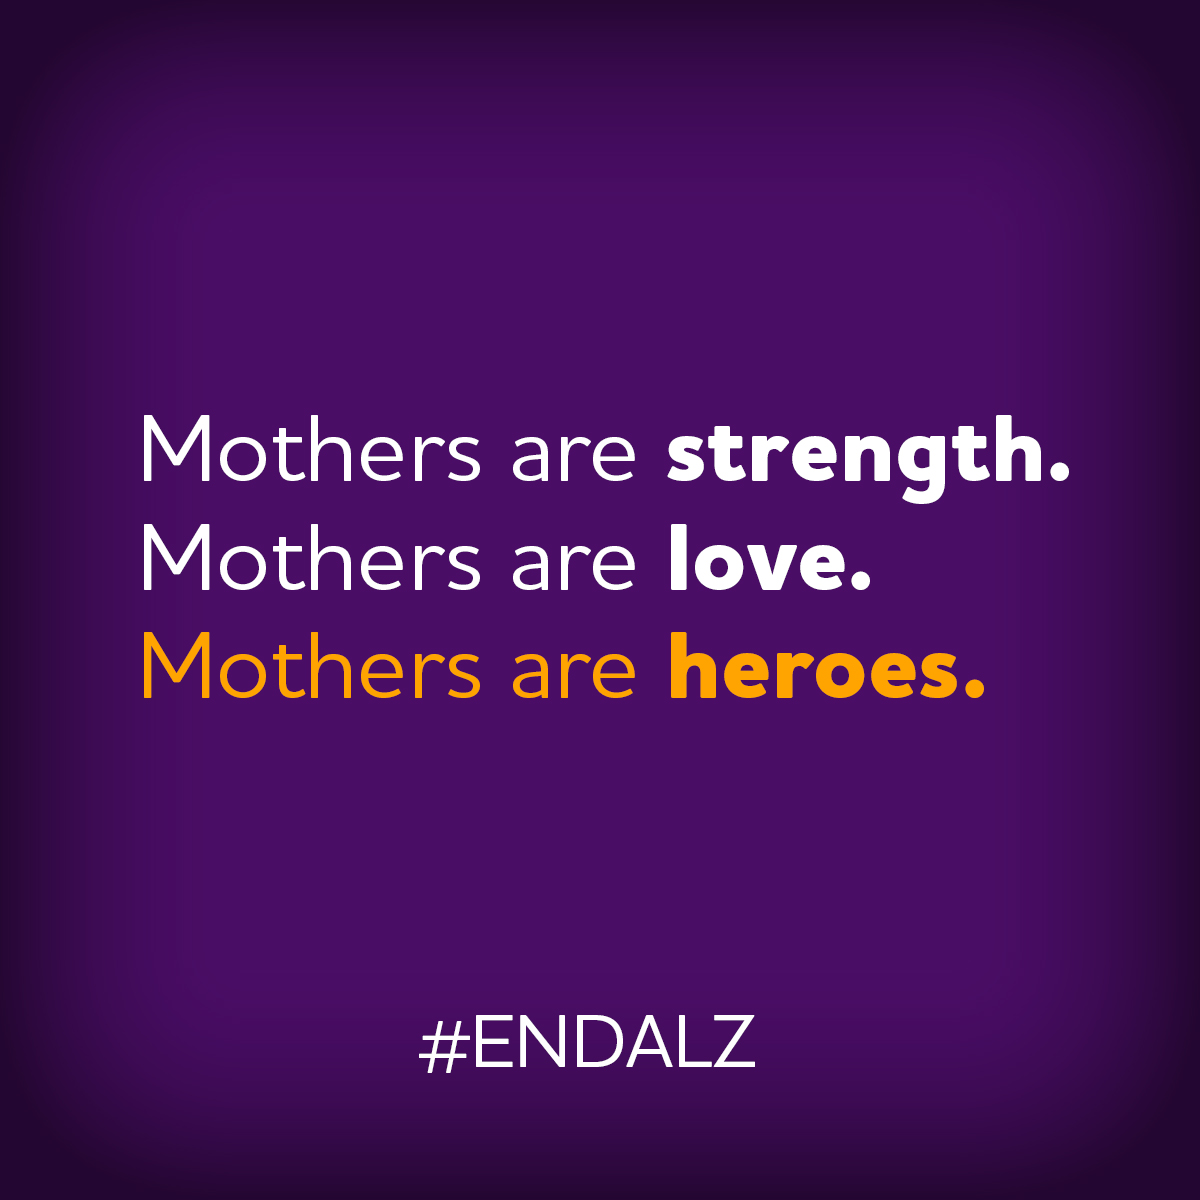 Happy #MothersDay to all of the mothers, grandmothers, aunts and inspiring women who have been impacted by Alzheimer’s and other dementia. We will continue to fight to #ENDALZ for you and all those affected. 💜